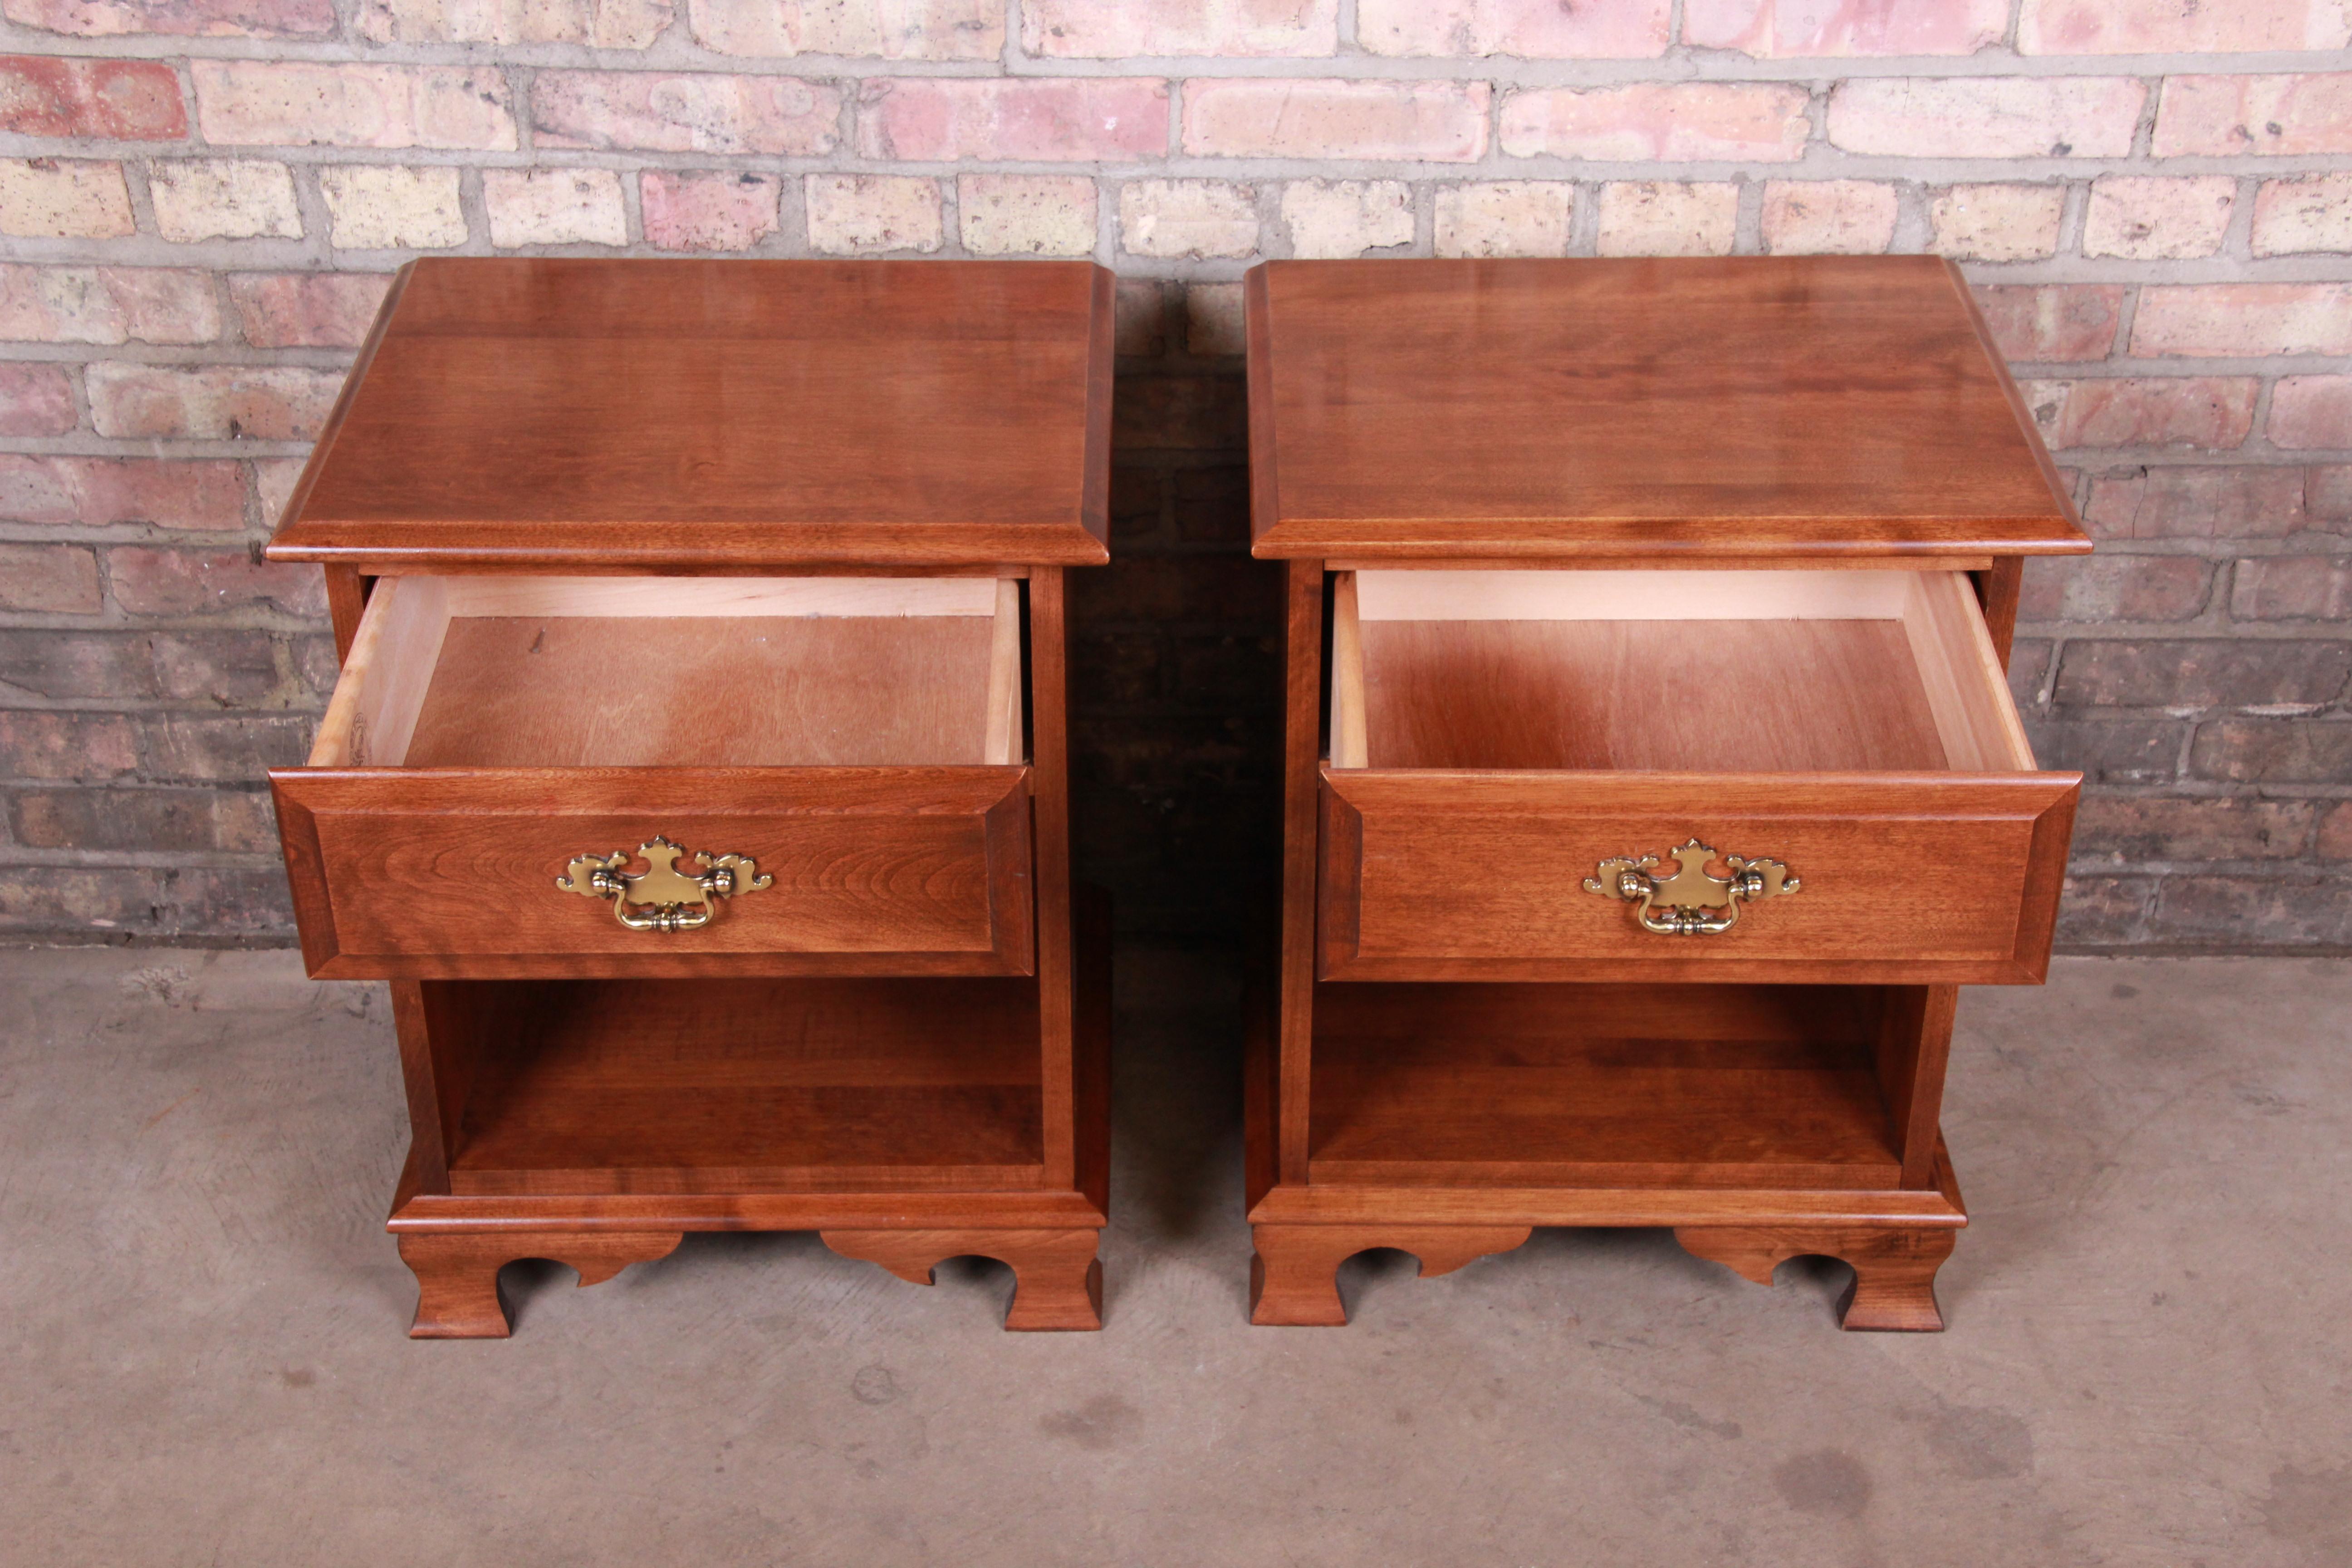 Late 20th Century Solid Cherry Chippendale Style Nightstands by Moosehead Furniture, Pair